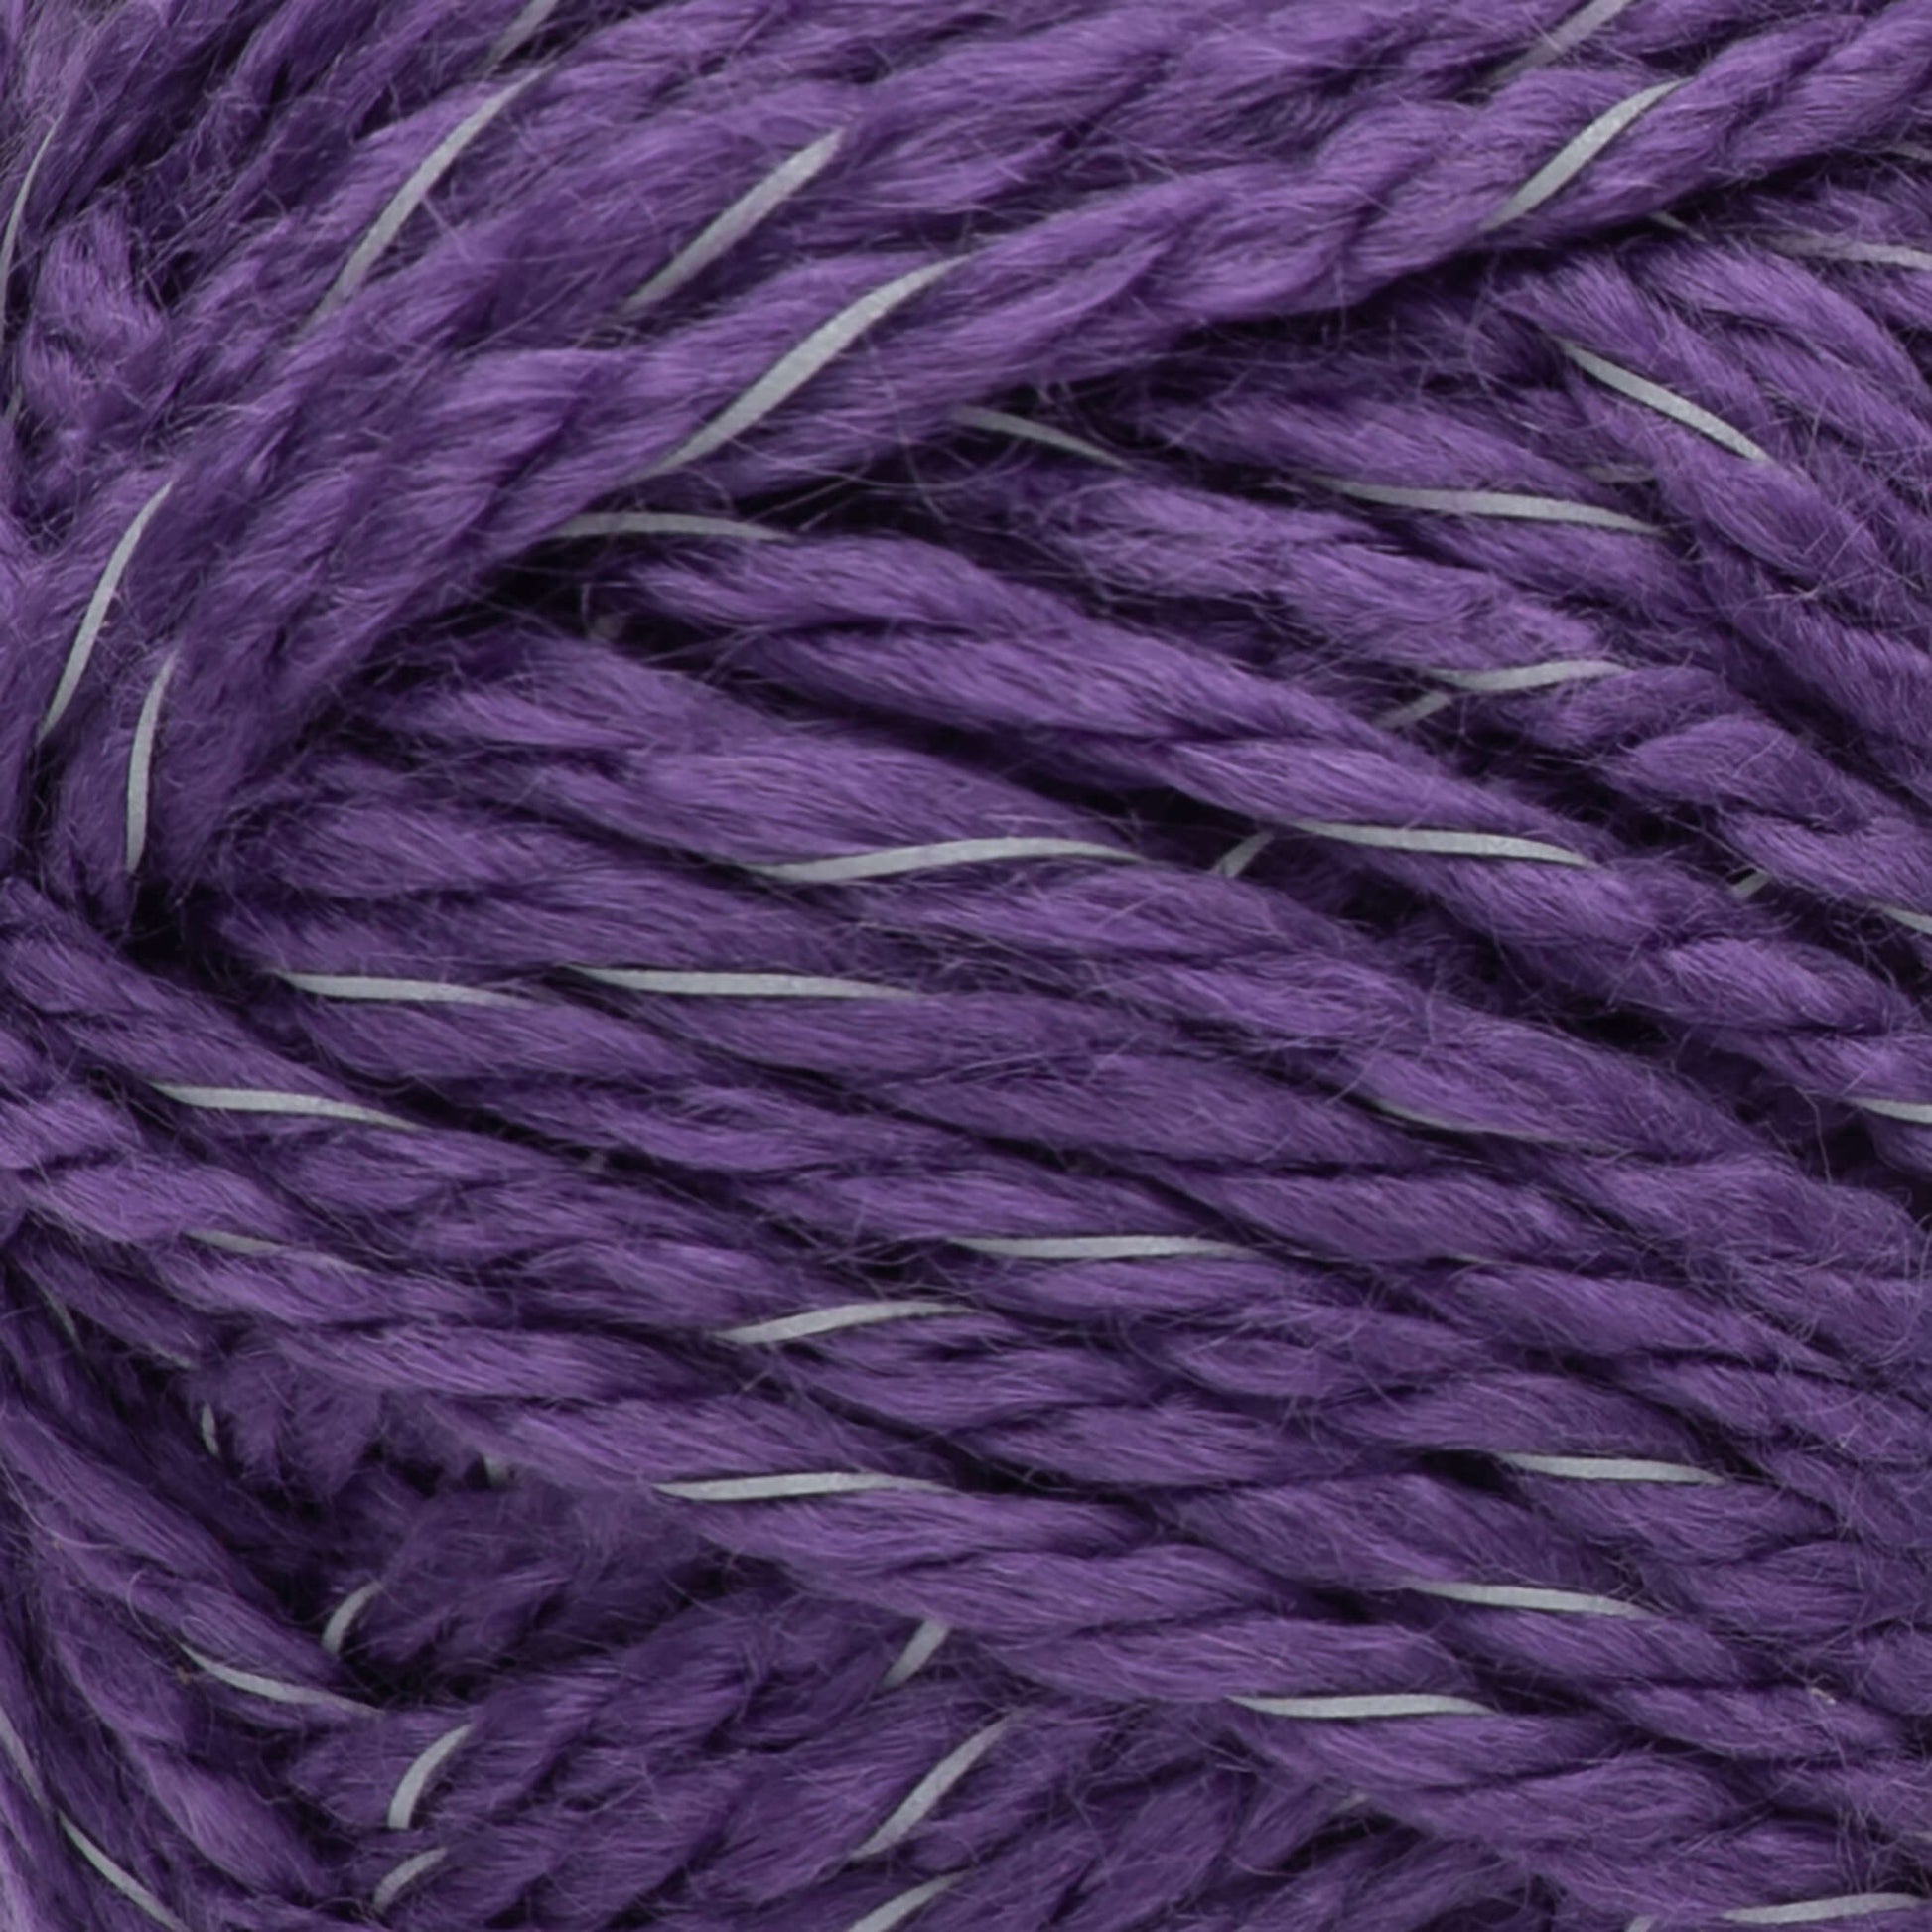 Red Heart Reflective Yarn - Discontinued Shades Purple